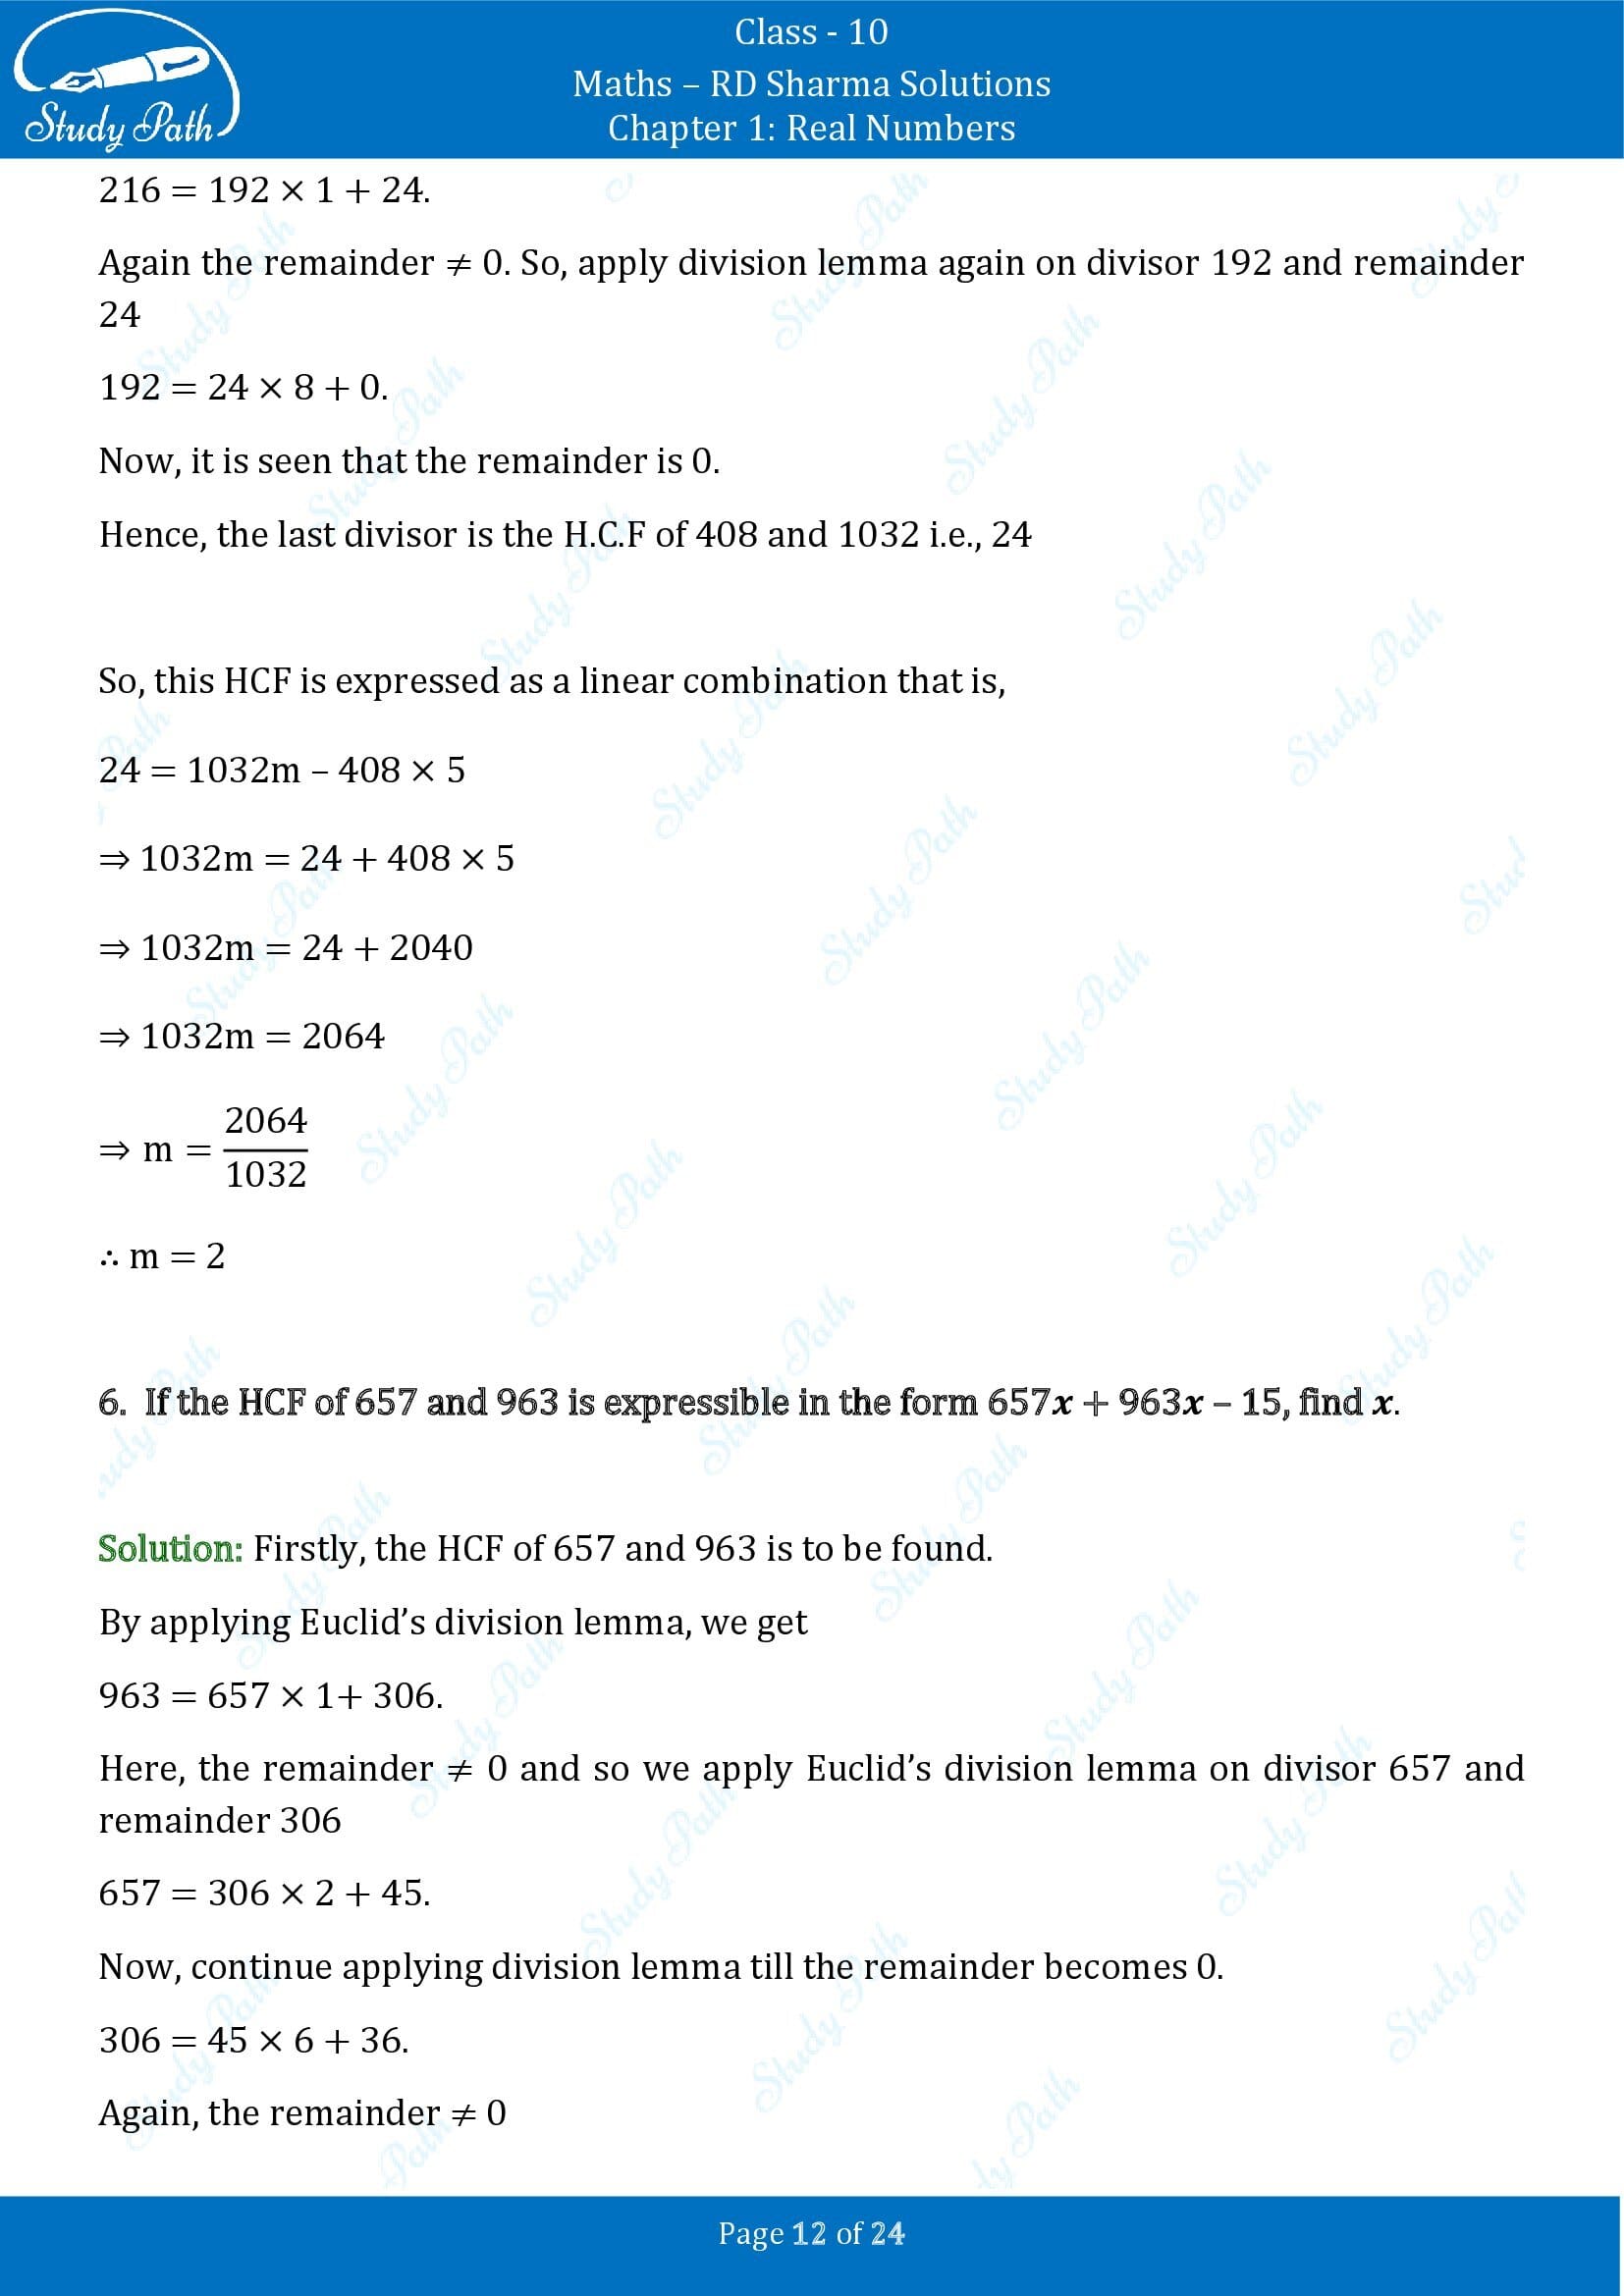 RD Sharma Solutions Class 10 Chapter 1 Real Numbers Exercise 1.2 00012